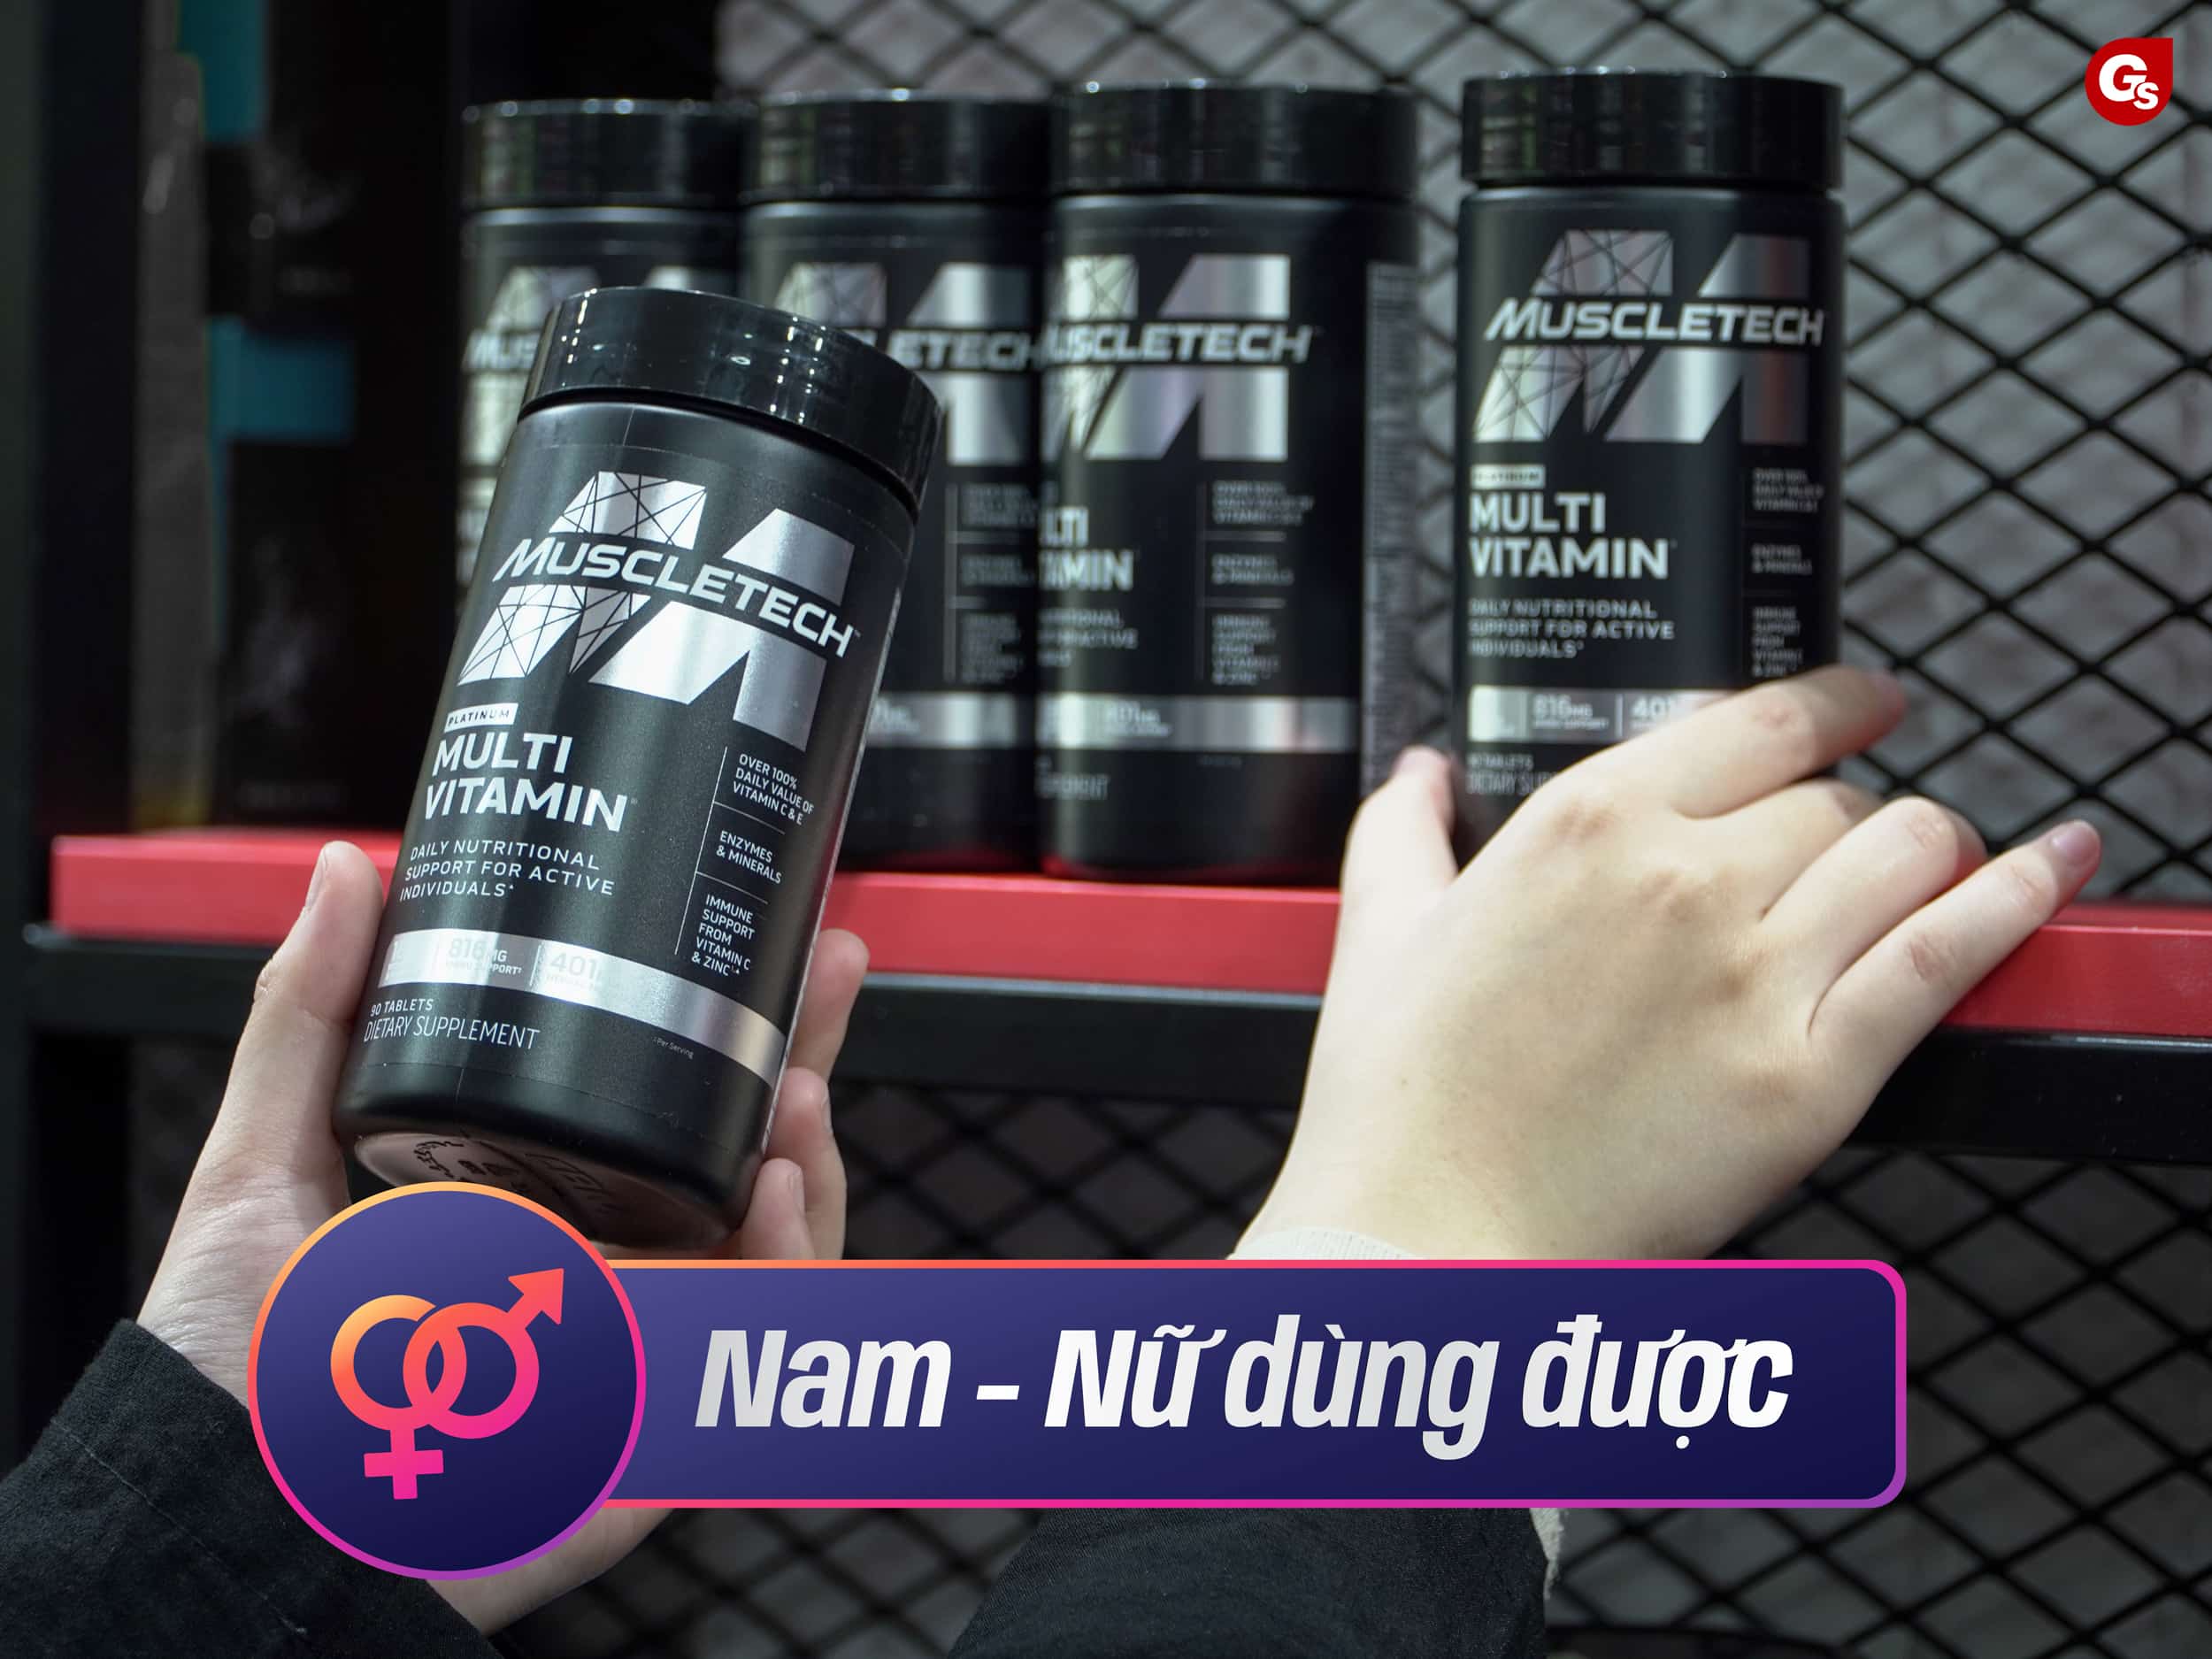 danh-gia-review-muscletech-platinum-vitamin-gymstore-2